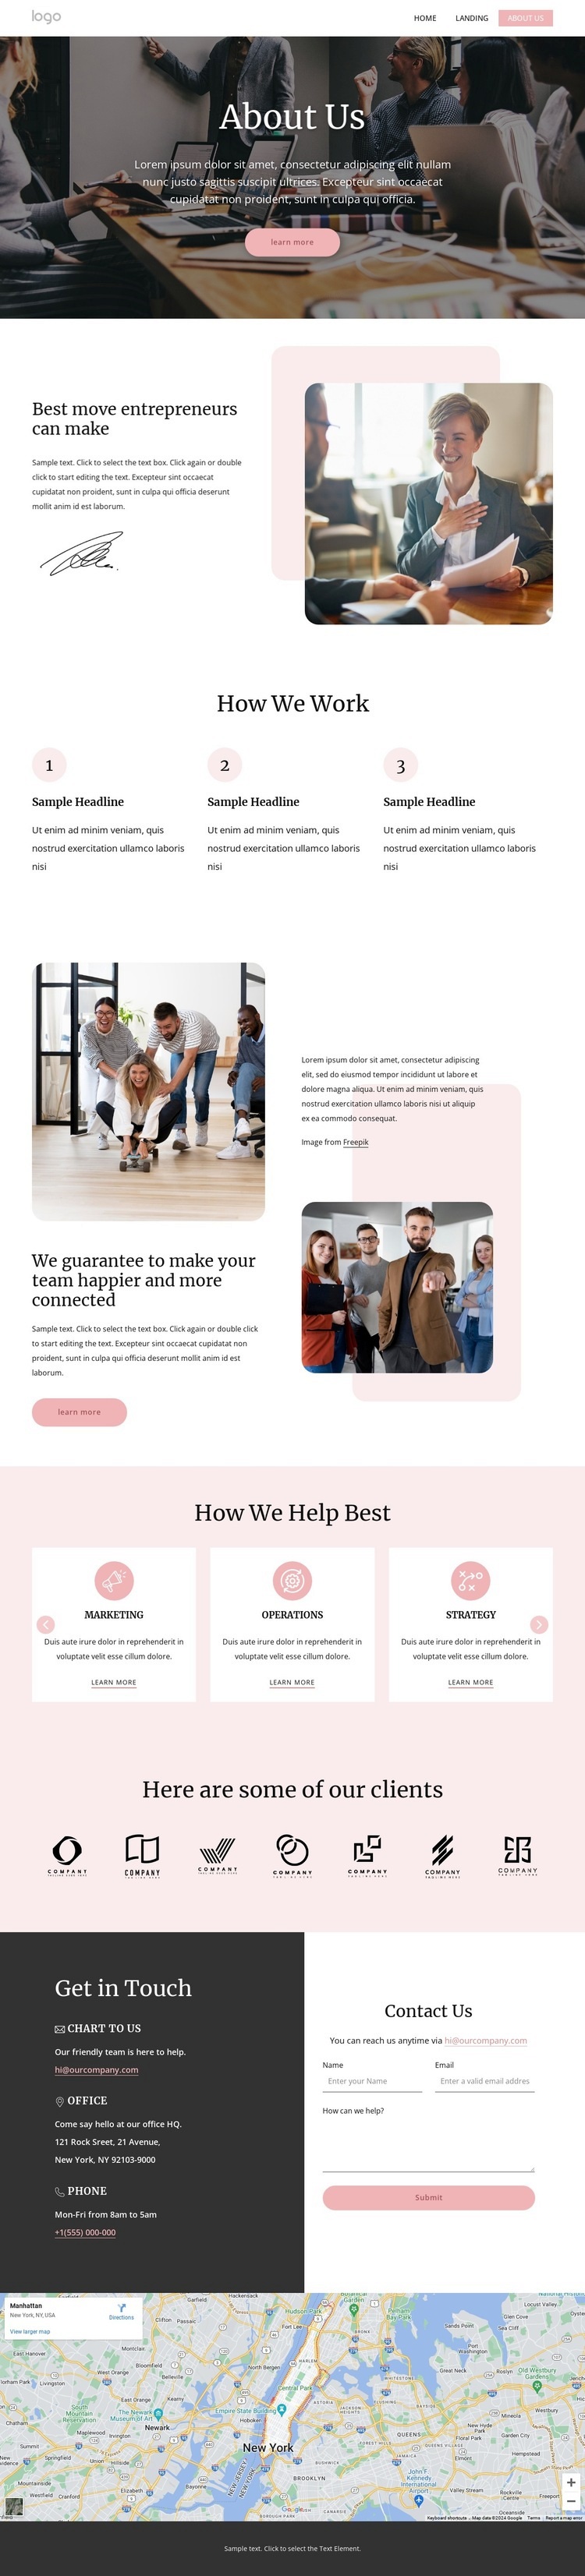 Team building expertise Html Code Example